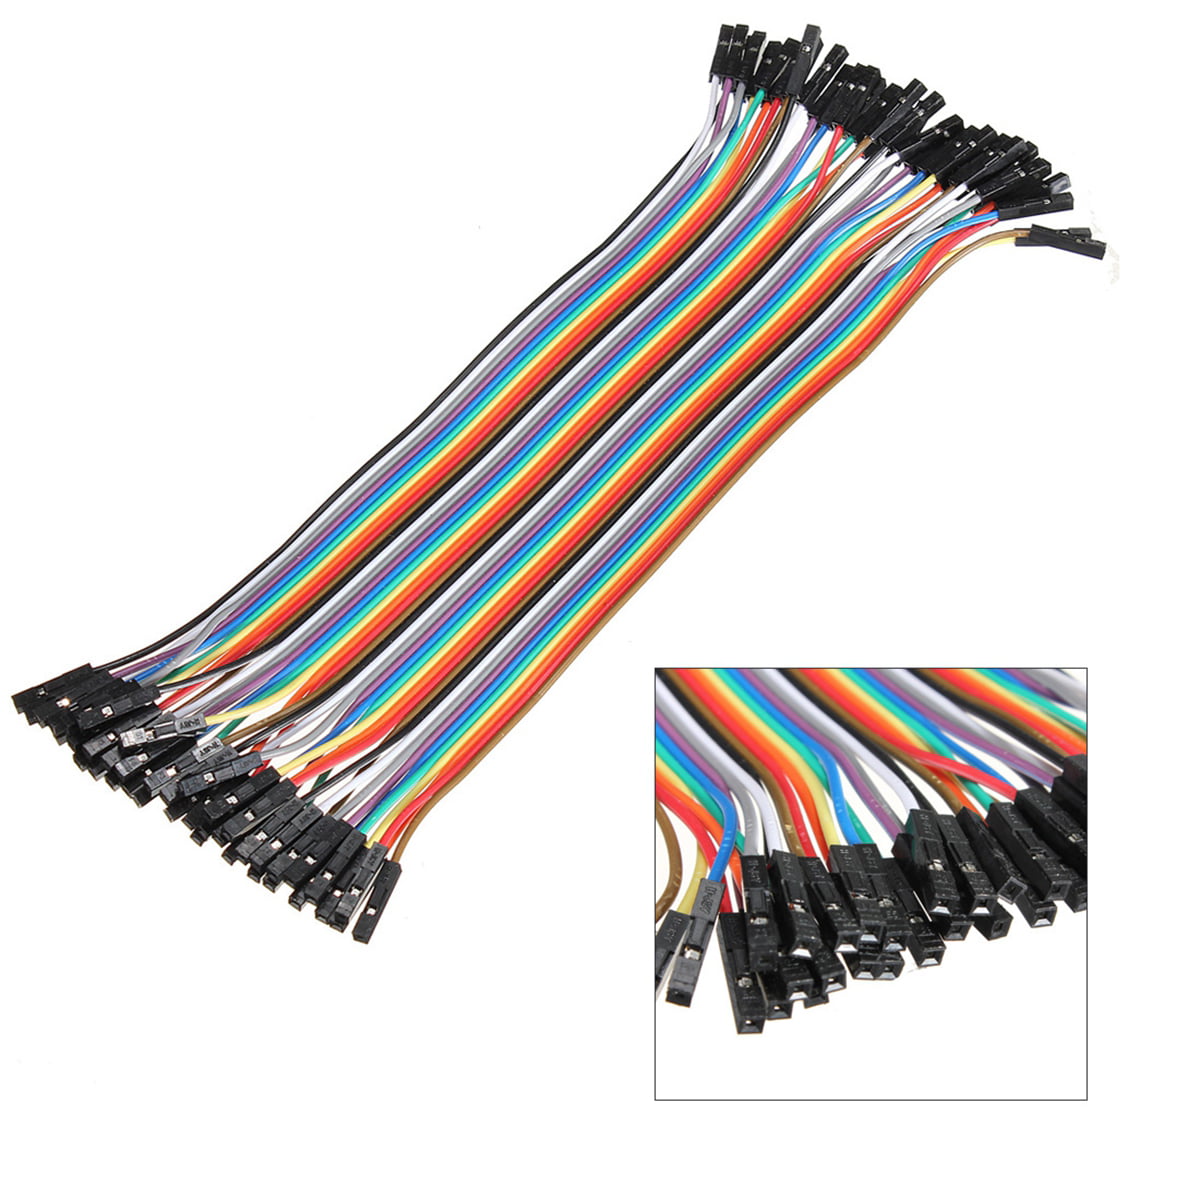 40pcs Dupont Wire Female to Female/Male to Male/Male to Female Jumper Cable HQ 